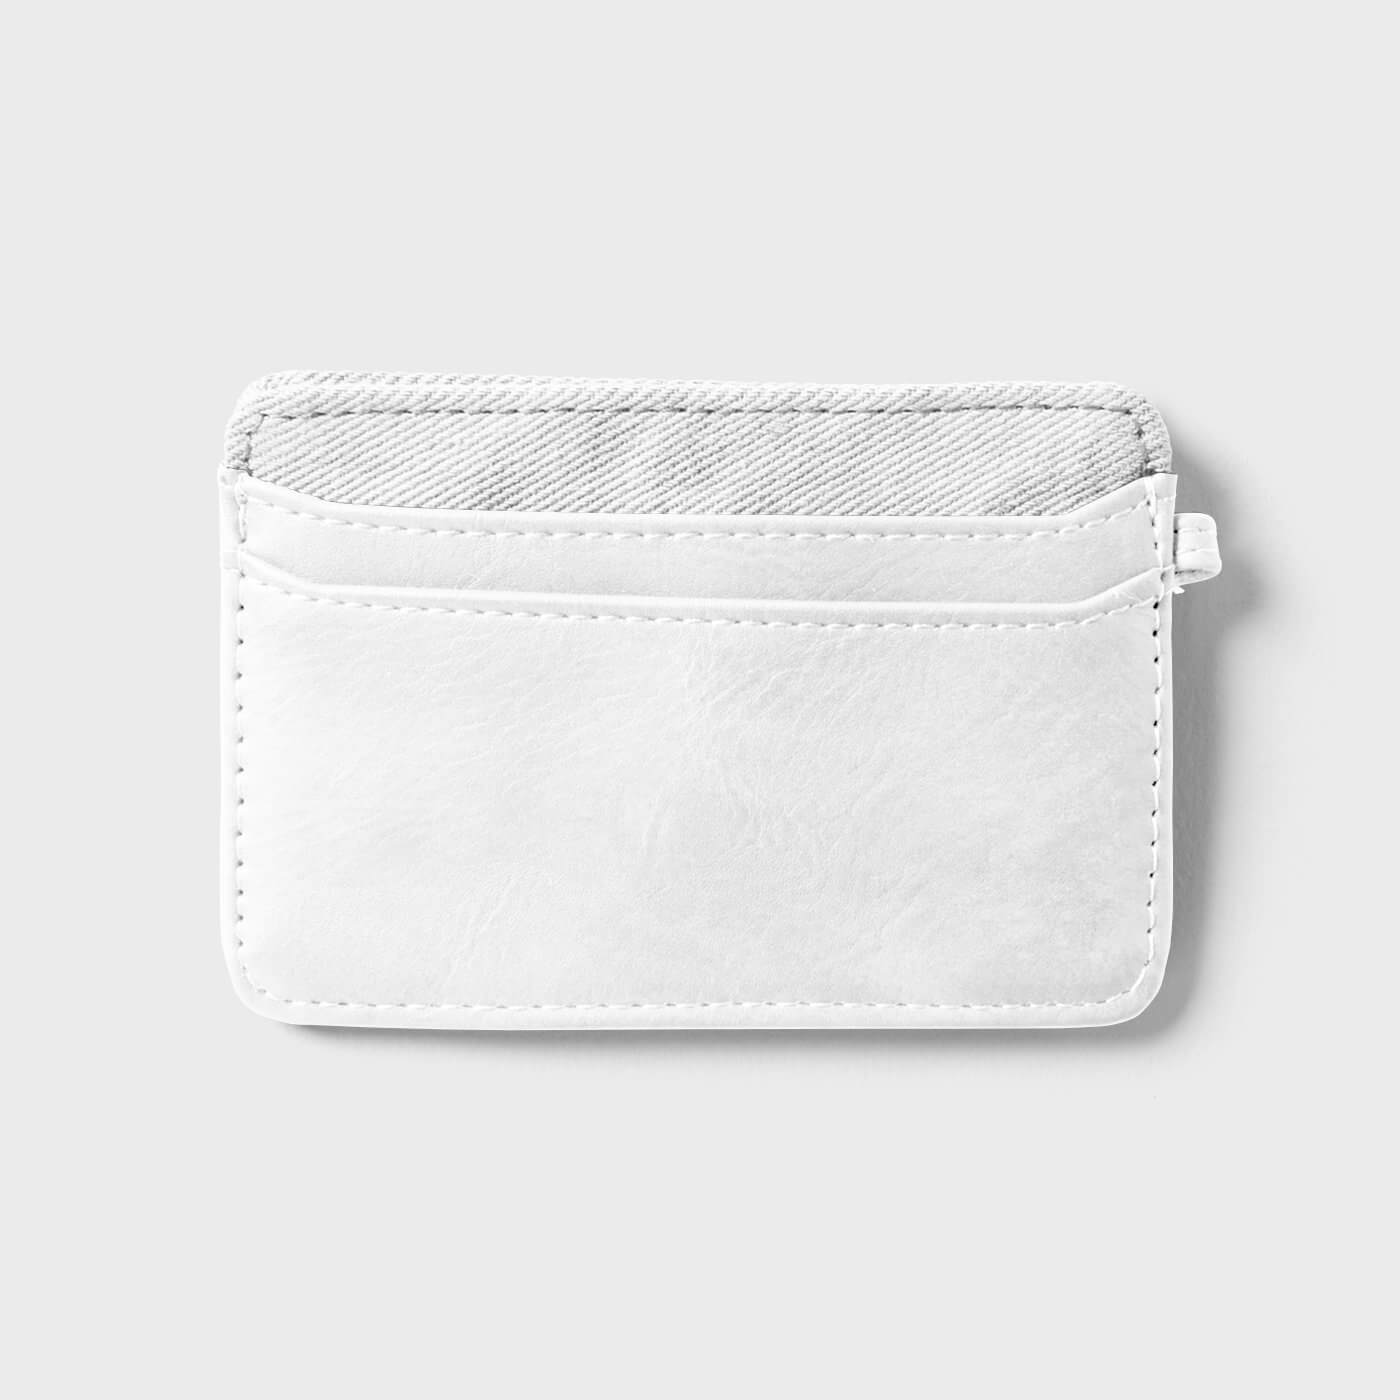 Front View of Small Leather Wallet Mockup 